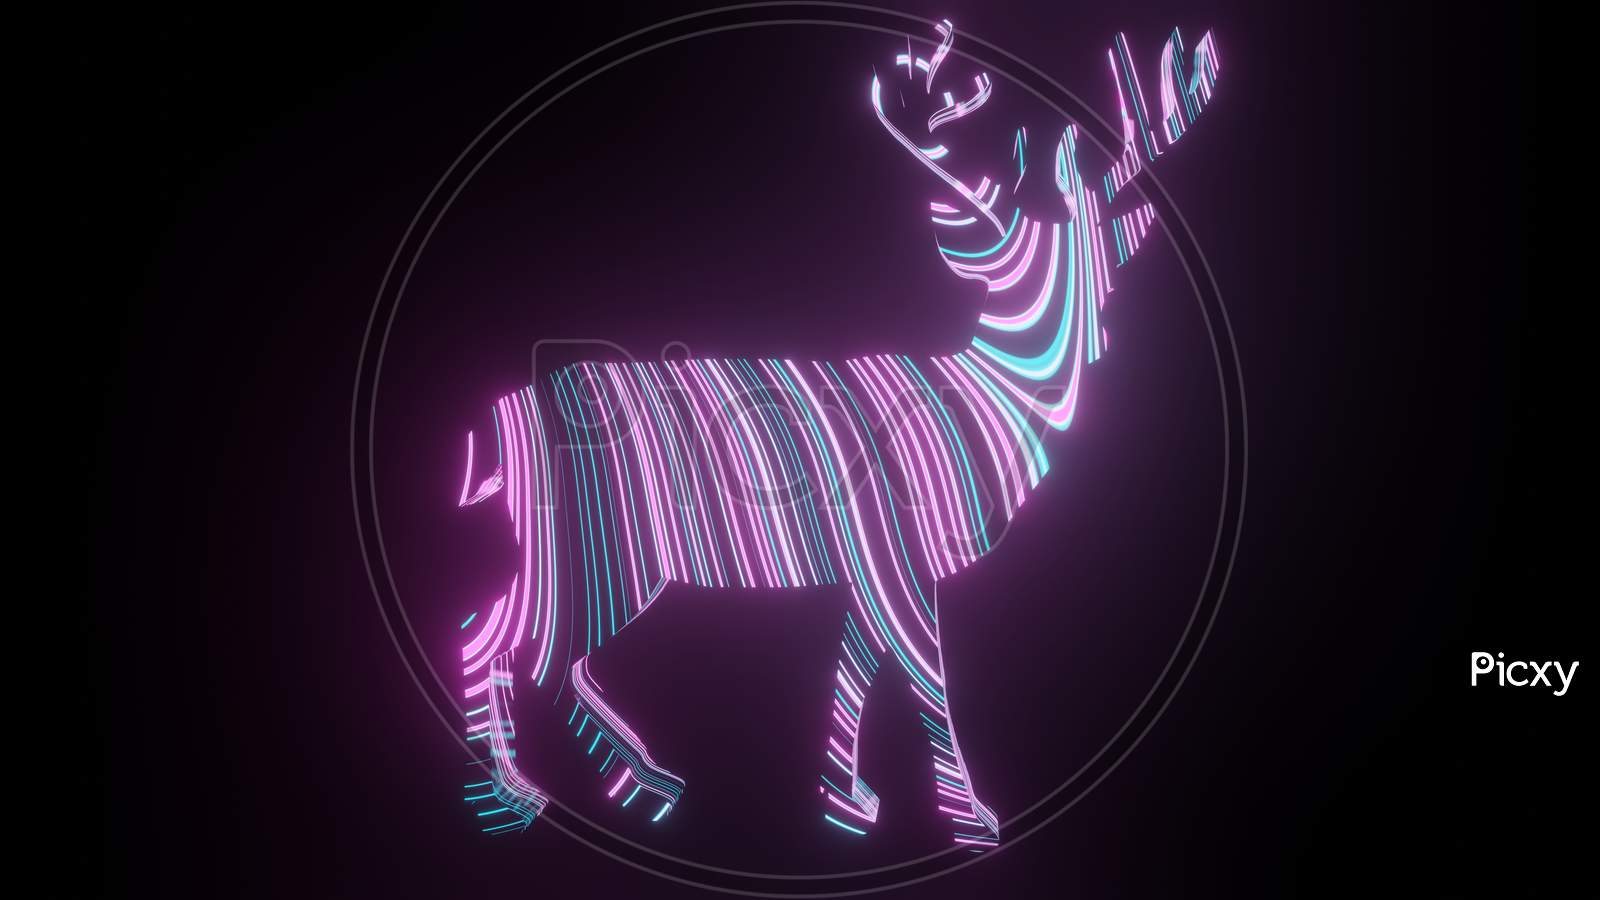 Illustration Graphic Of Beautiful Colorful Line Texture Or Pattern Formation On The Deer Body Shape, Isolated On Black Background. 3D Rendering Abstract Loop Neon Lighting Effect On Reindeer.